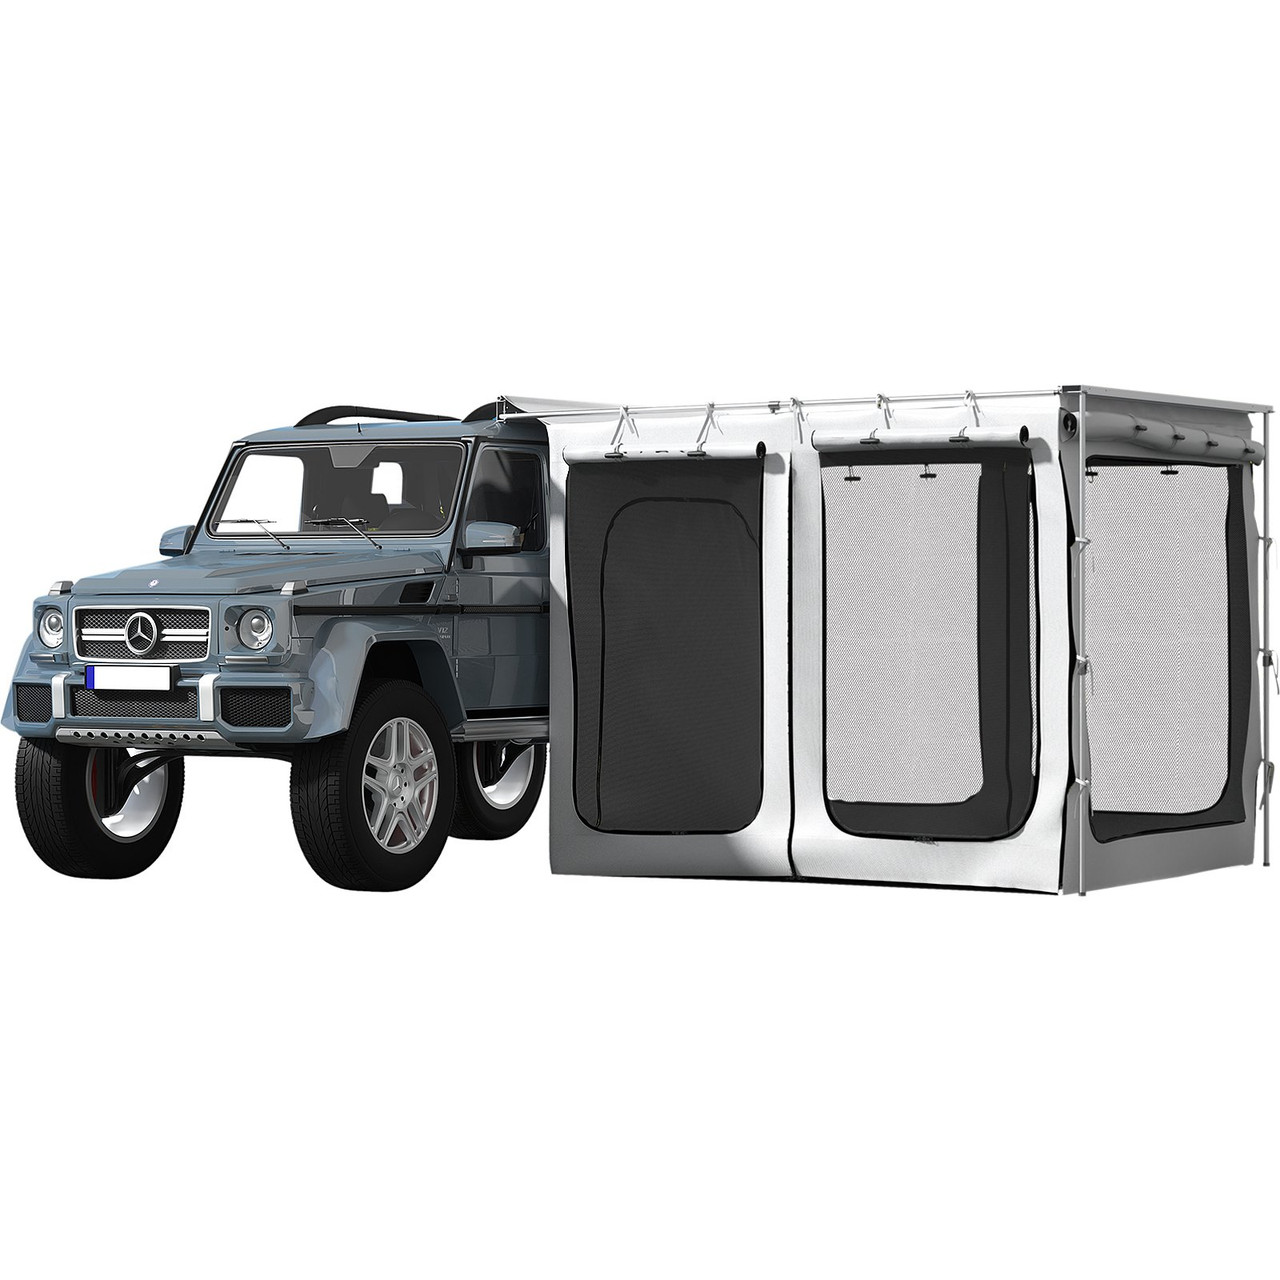 Awning Room Accessory, Fit 6.5' x 8.2', 300D Oxford Shelter Side Wall Room with PVC Floor, Heavy Duty Extend Shelter for Car Awning SUV Tent Camper Van Overland Gear, Grey, Room Only (100-25619)